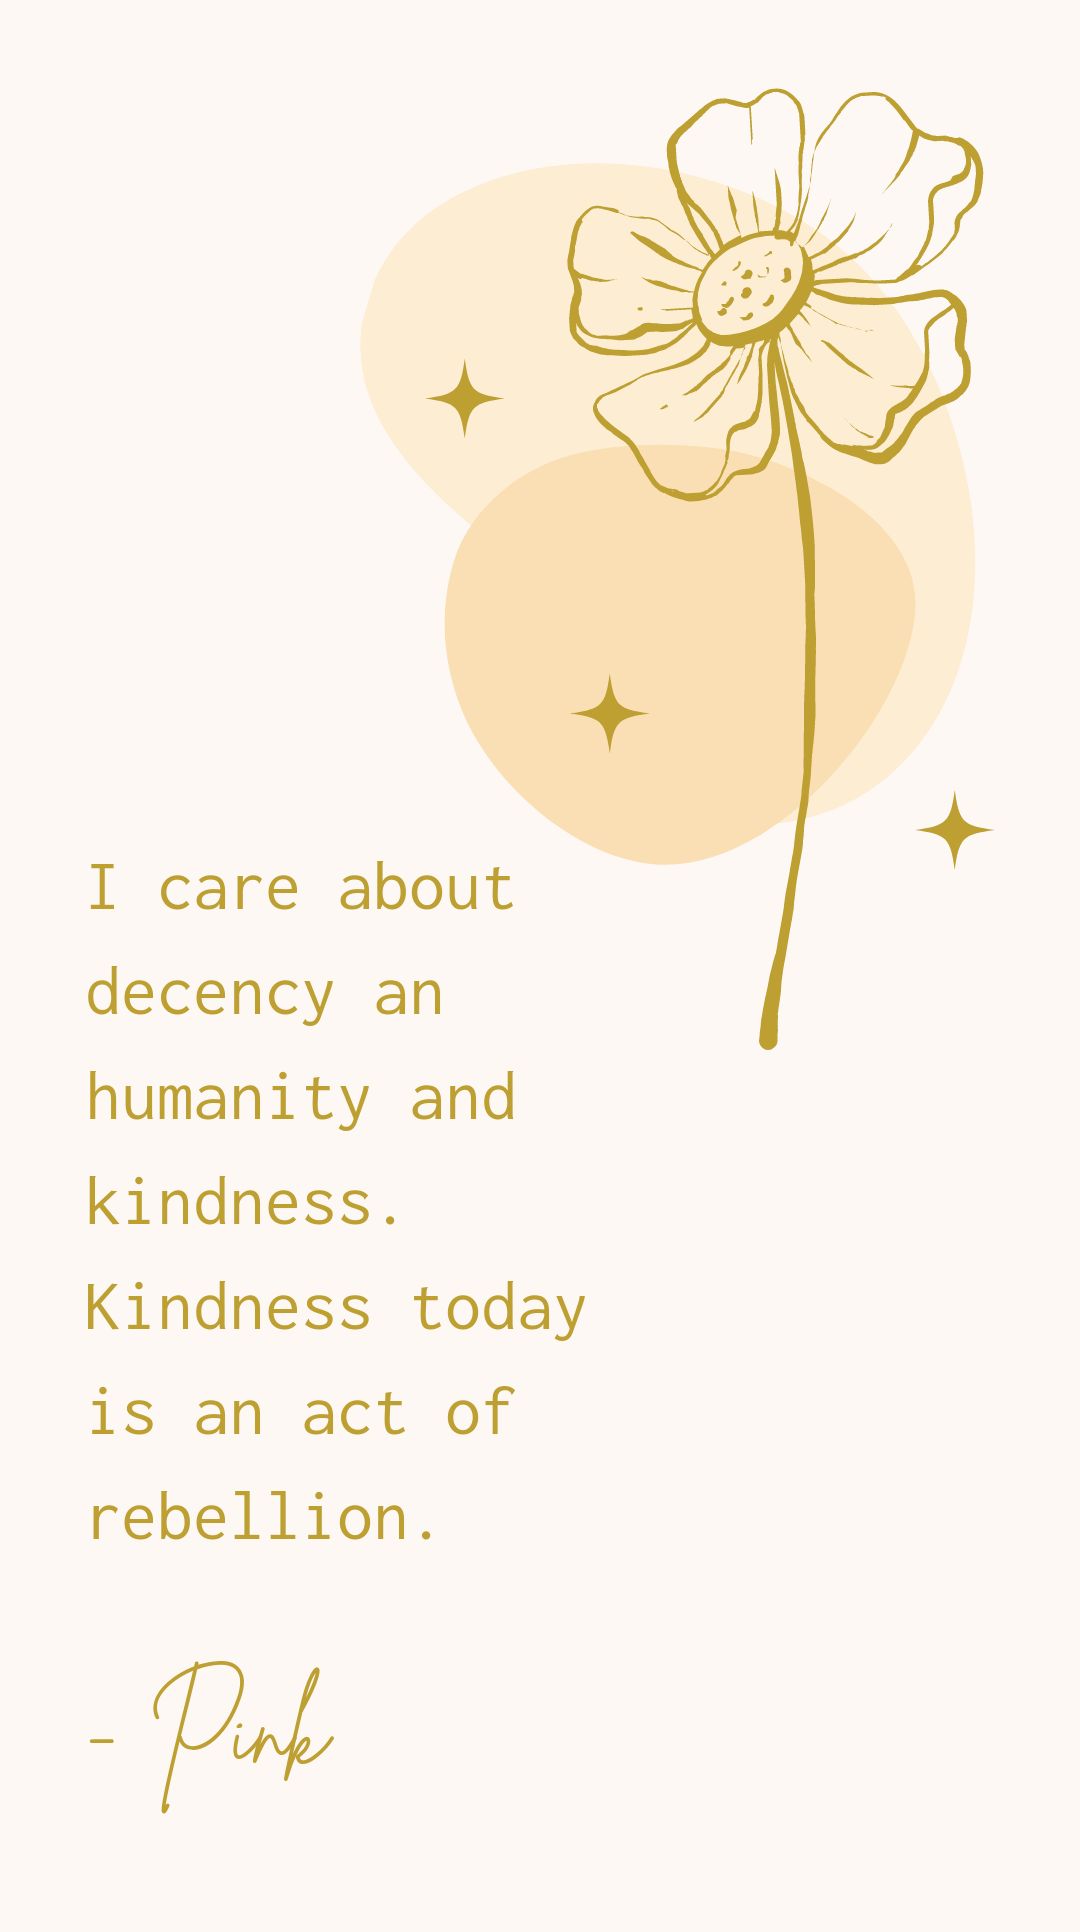 Pink - I care about decency and humanity and kindness. Kindness today is an act of rebellion.